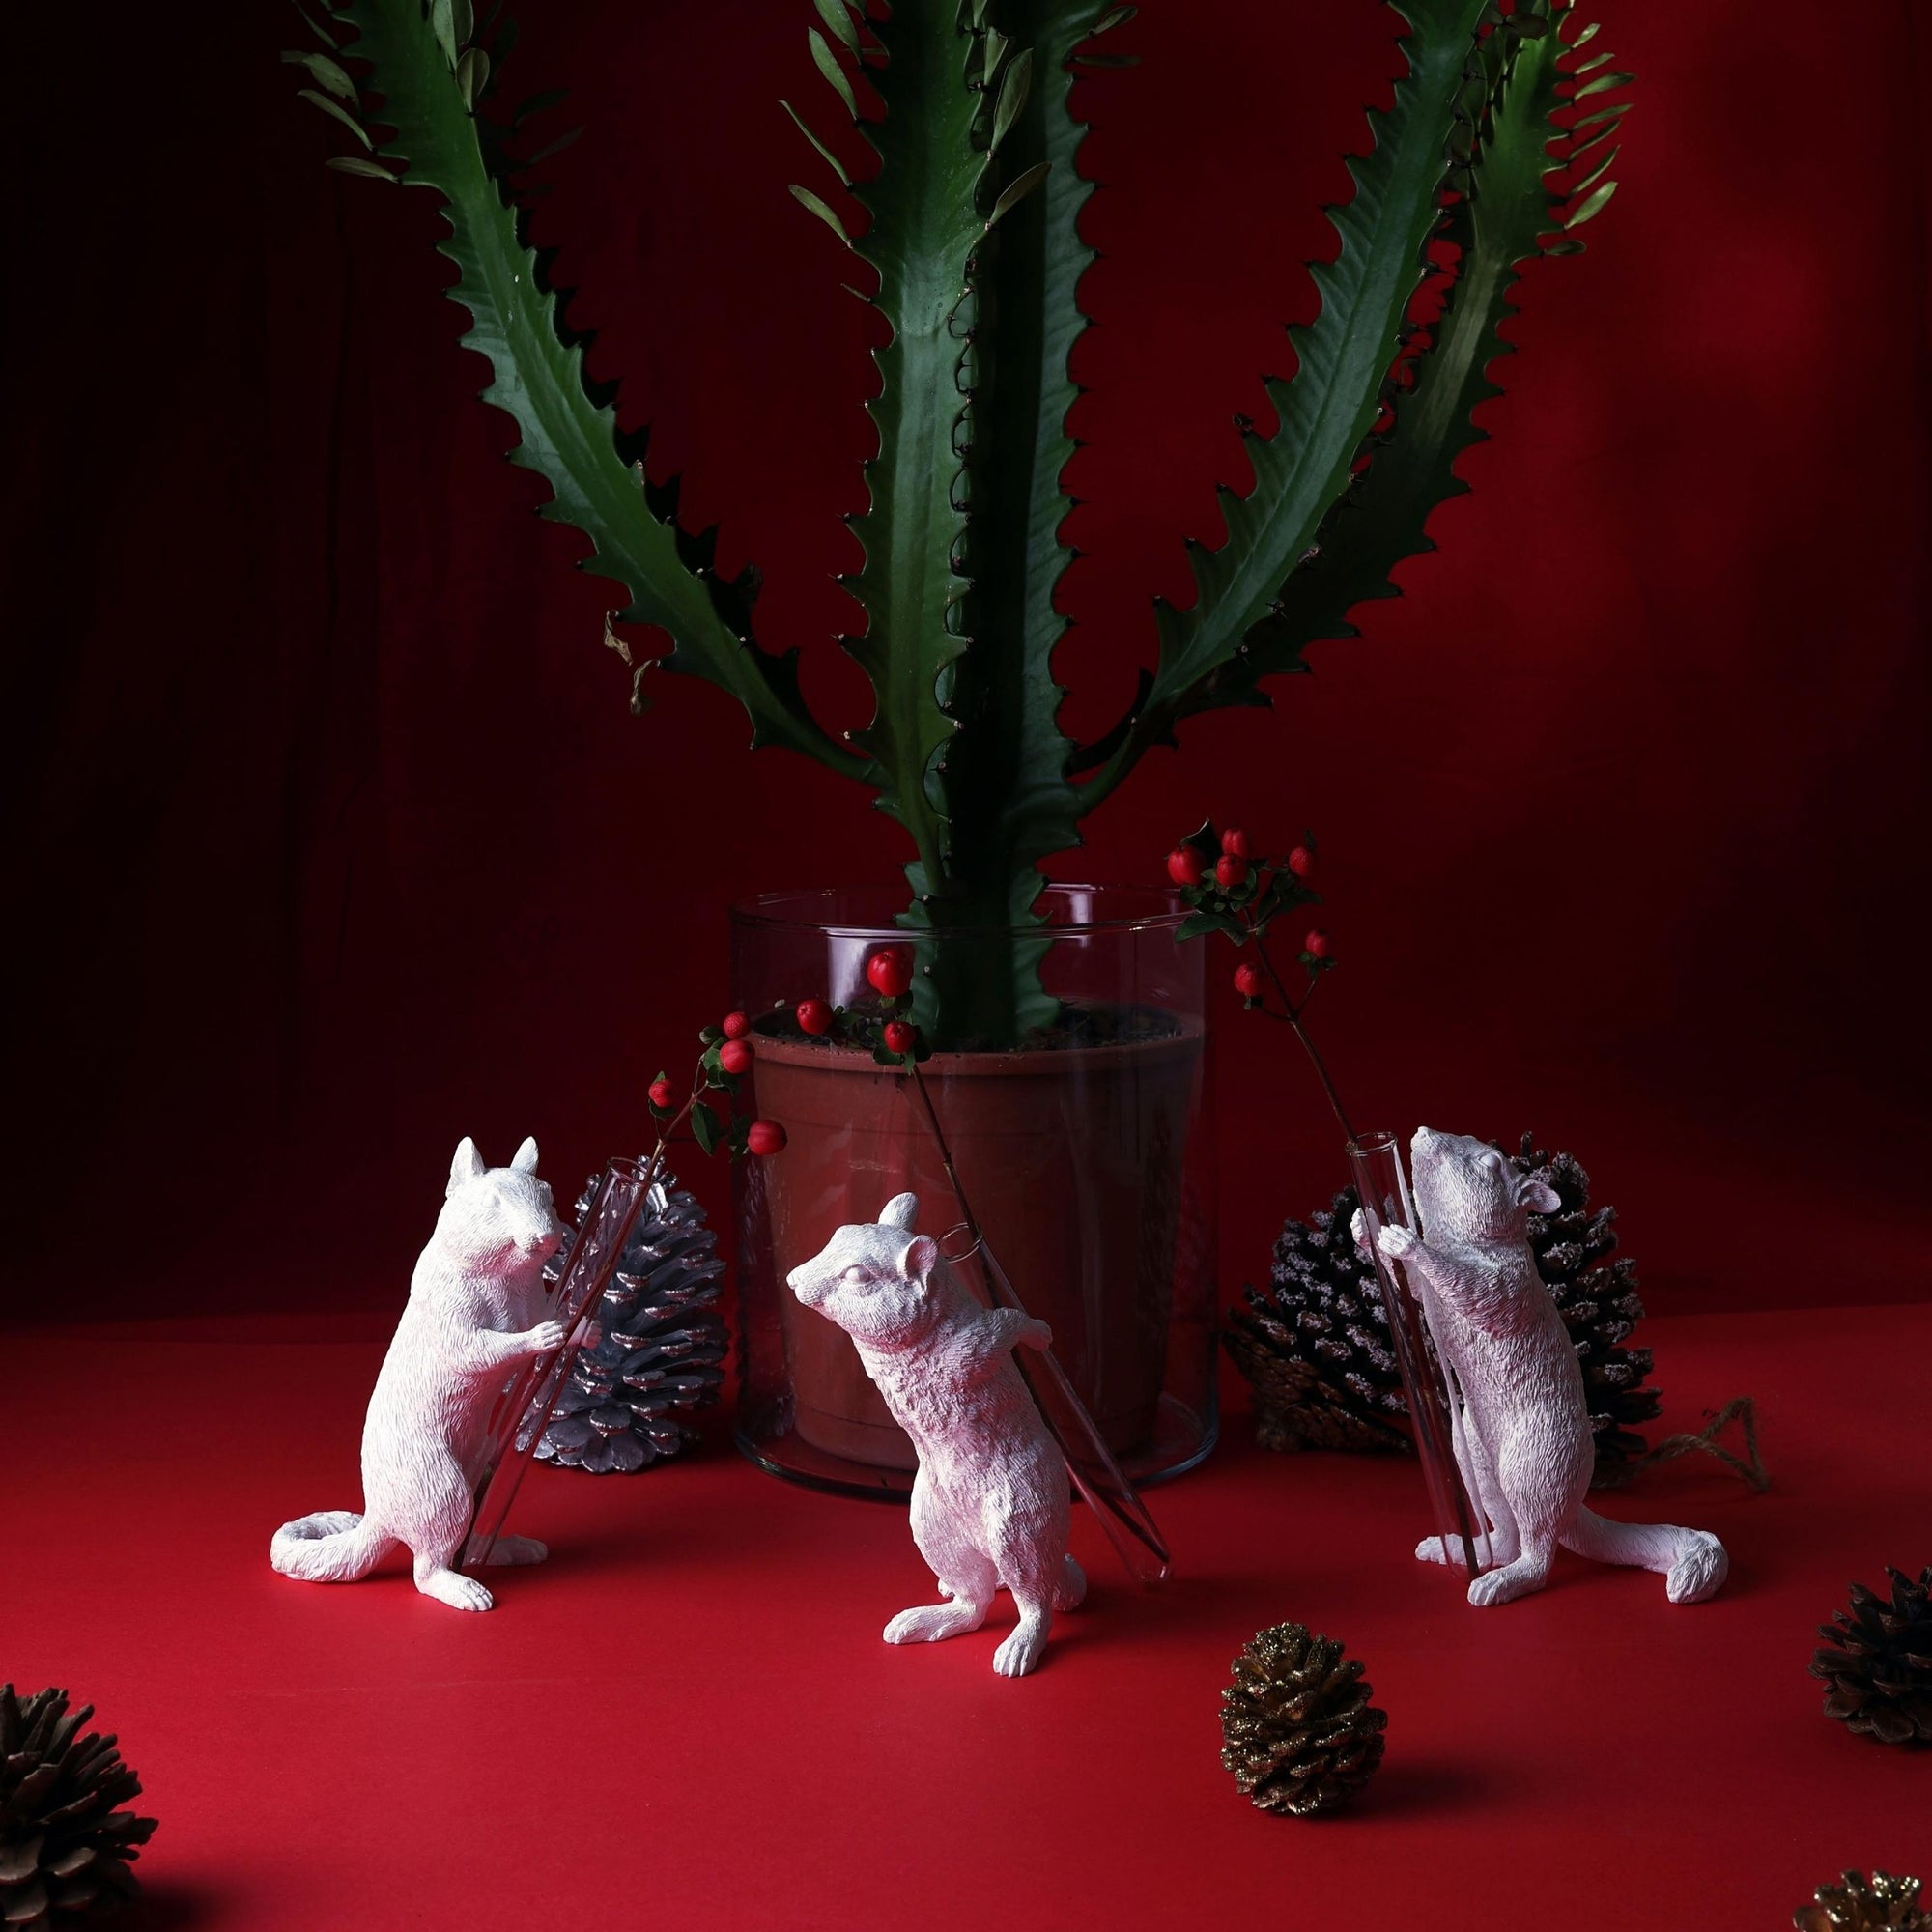 Squirrel Christmas brings you the best of decor and ornaments